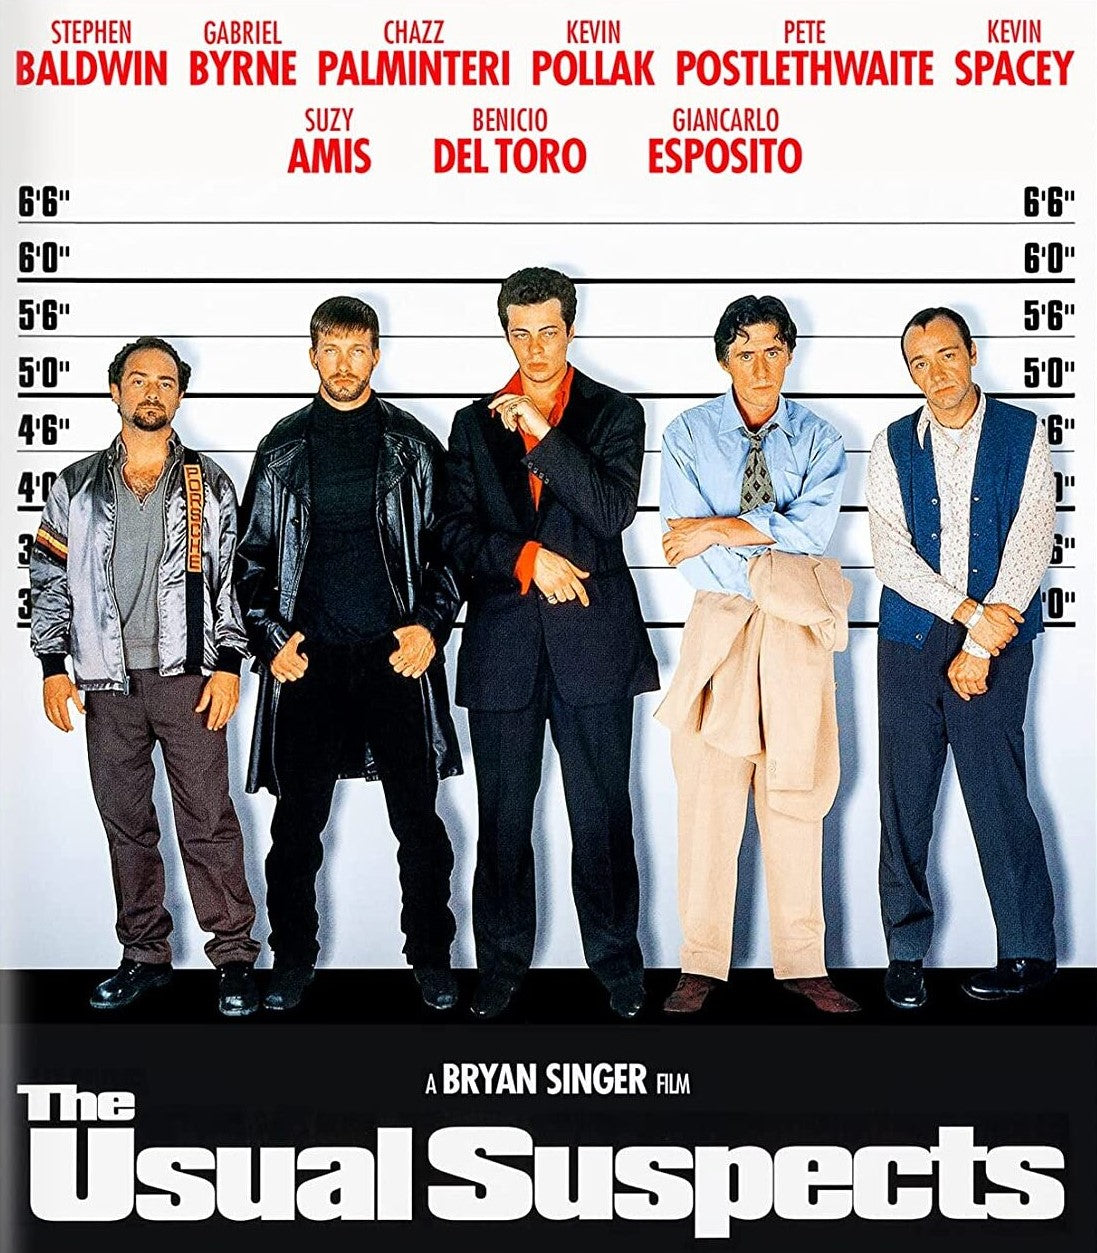 THE USUAL SUSPECTS 4K UHD/BLU-RAY